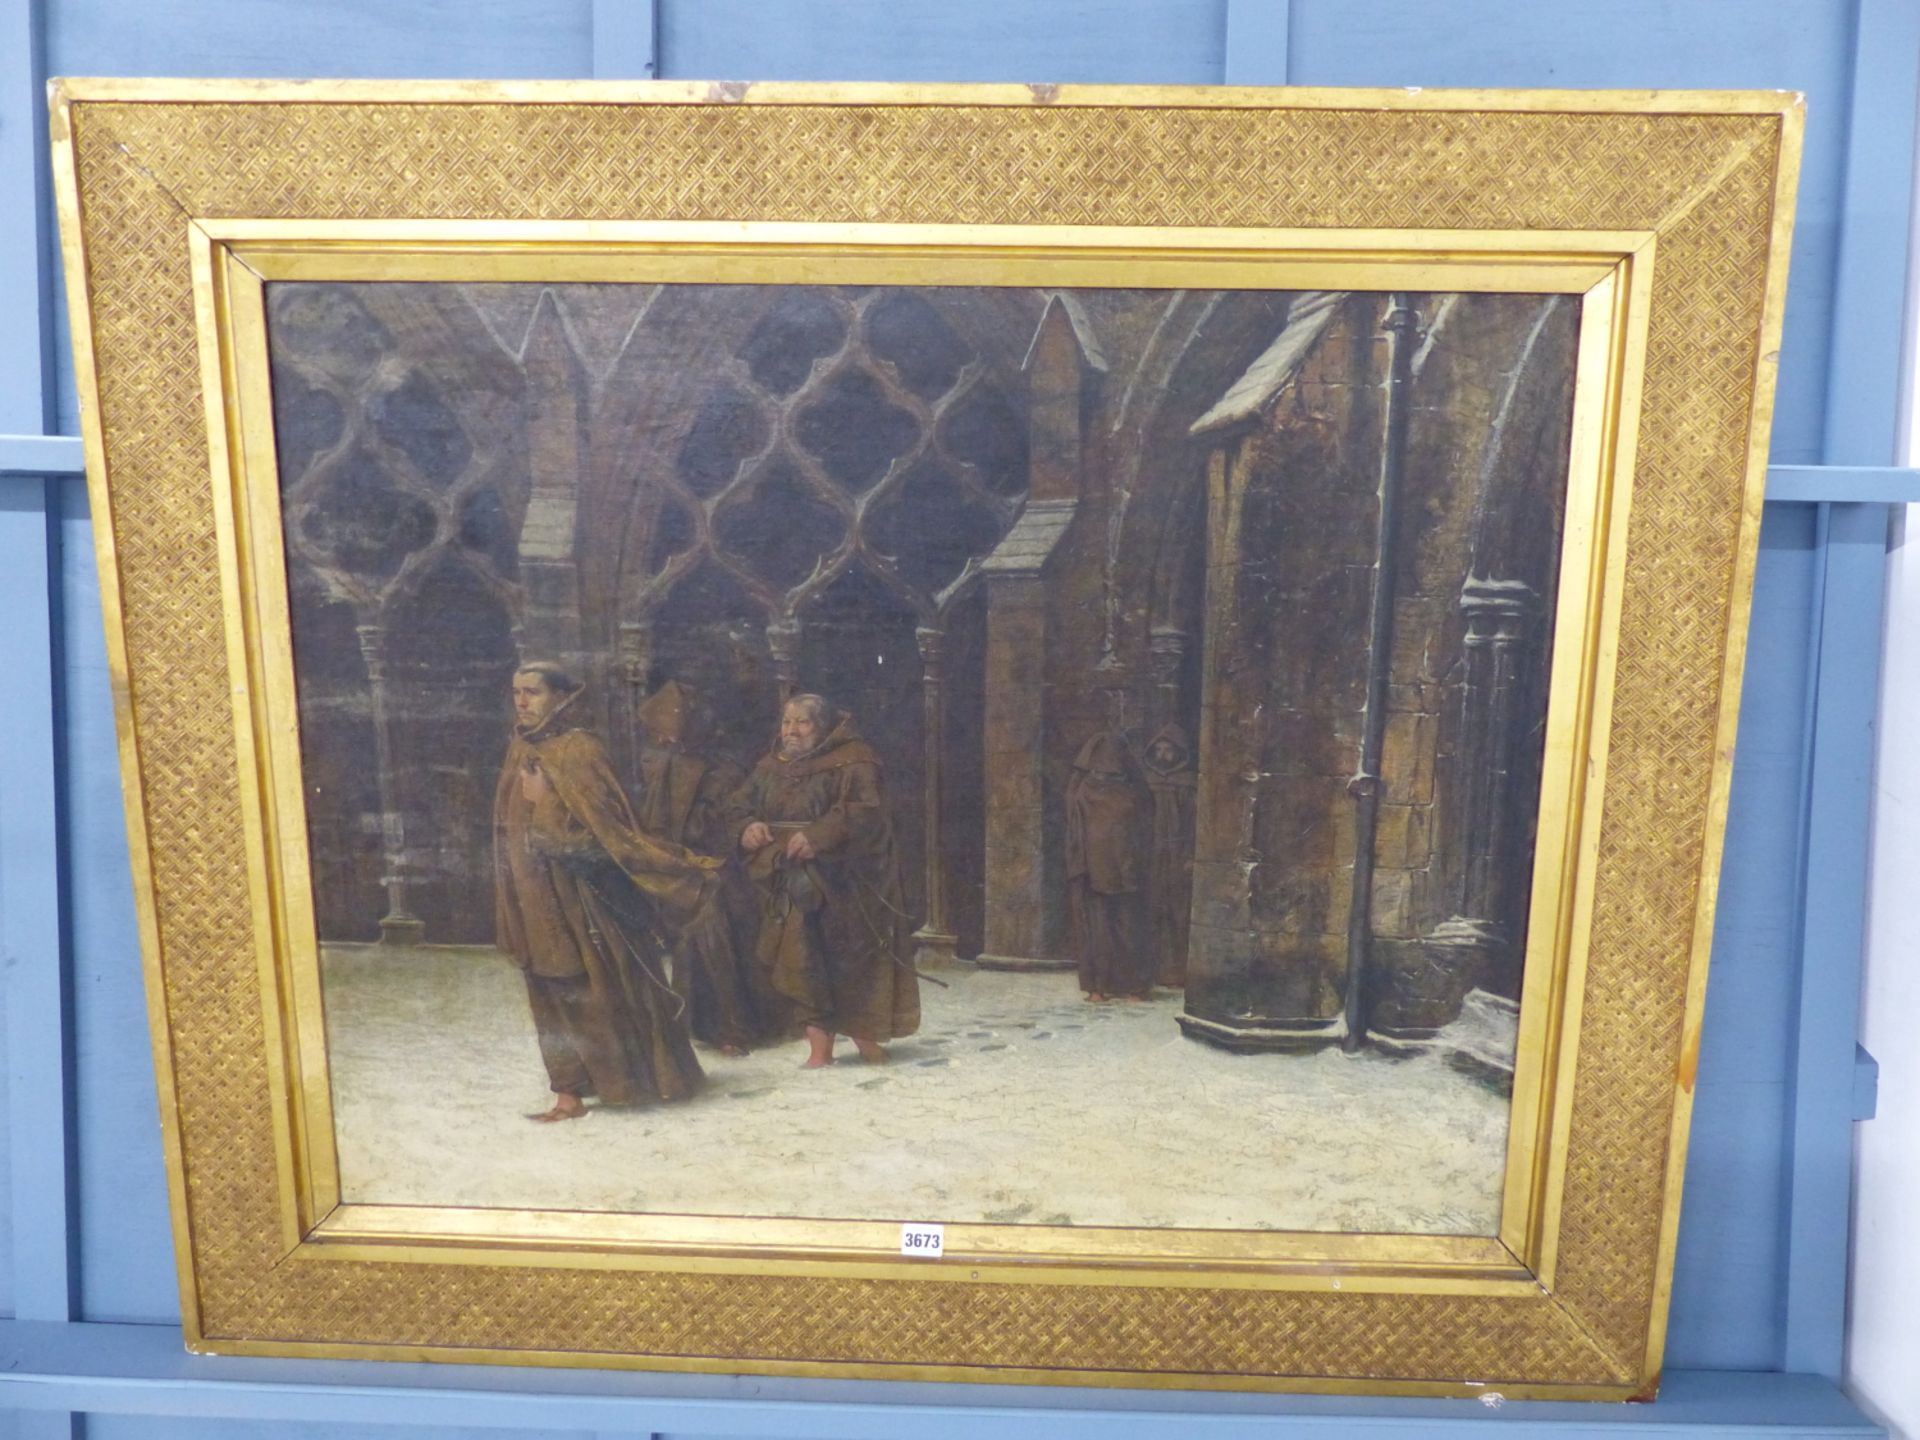 ALFRED TOURRIER (1836-1892) "MATINS" -MONKS ATTENDING MORNING PRAYER, OIL ON CANVAS. INITIALLED - Image 2 of 8